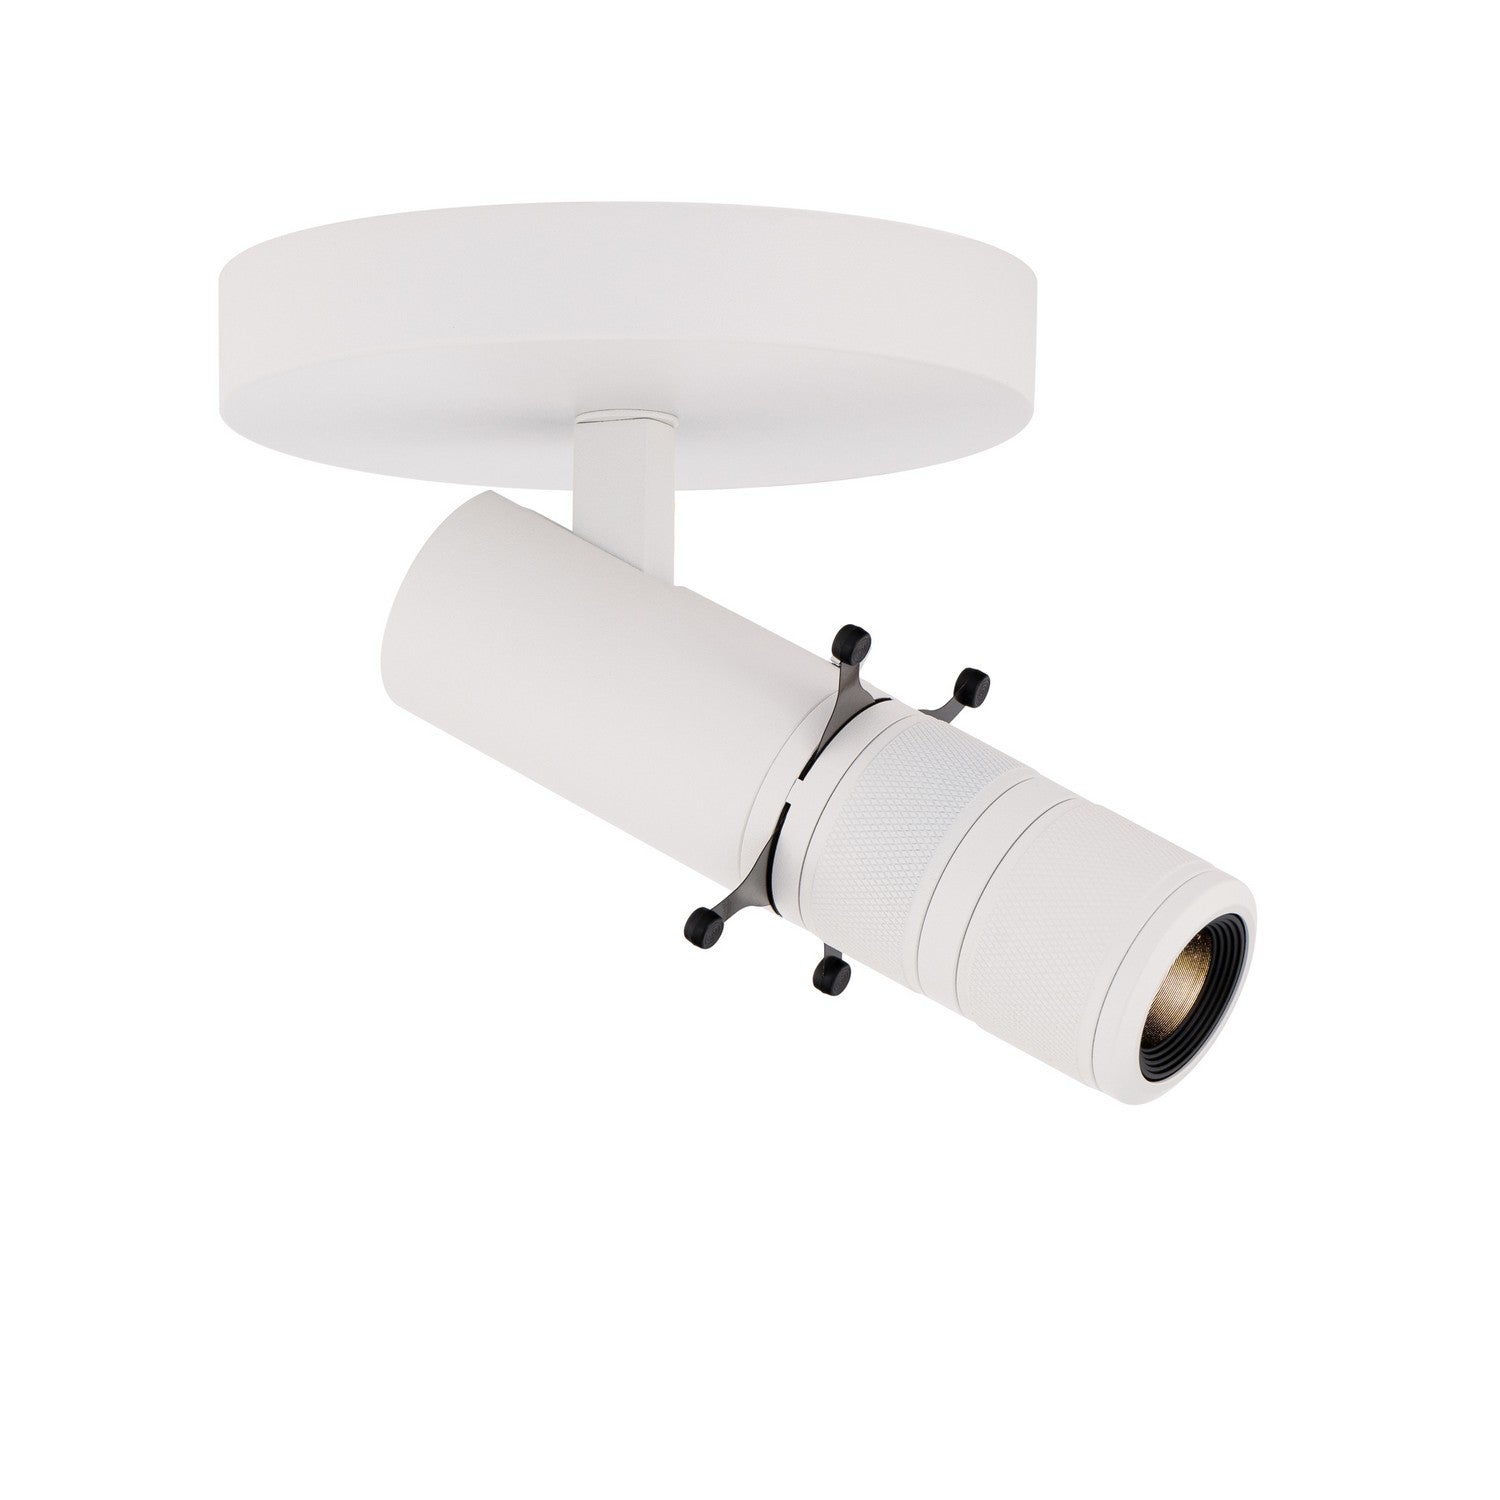 W.A.C. Canada - Framing Projector Monopoint Luminaire - Stealth Framing Projector Monopoint - White- Union Lighting Luminaires Decor